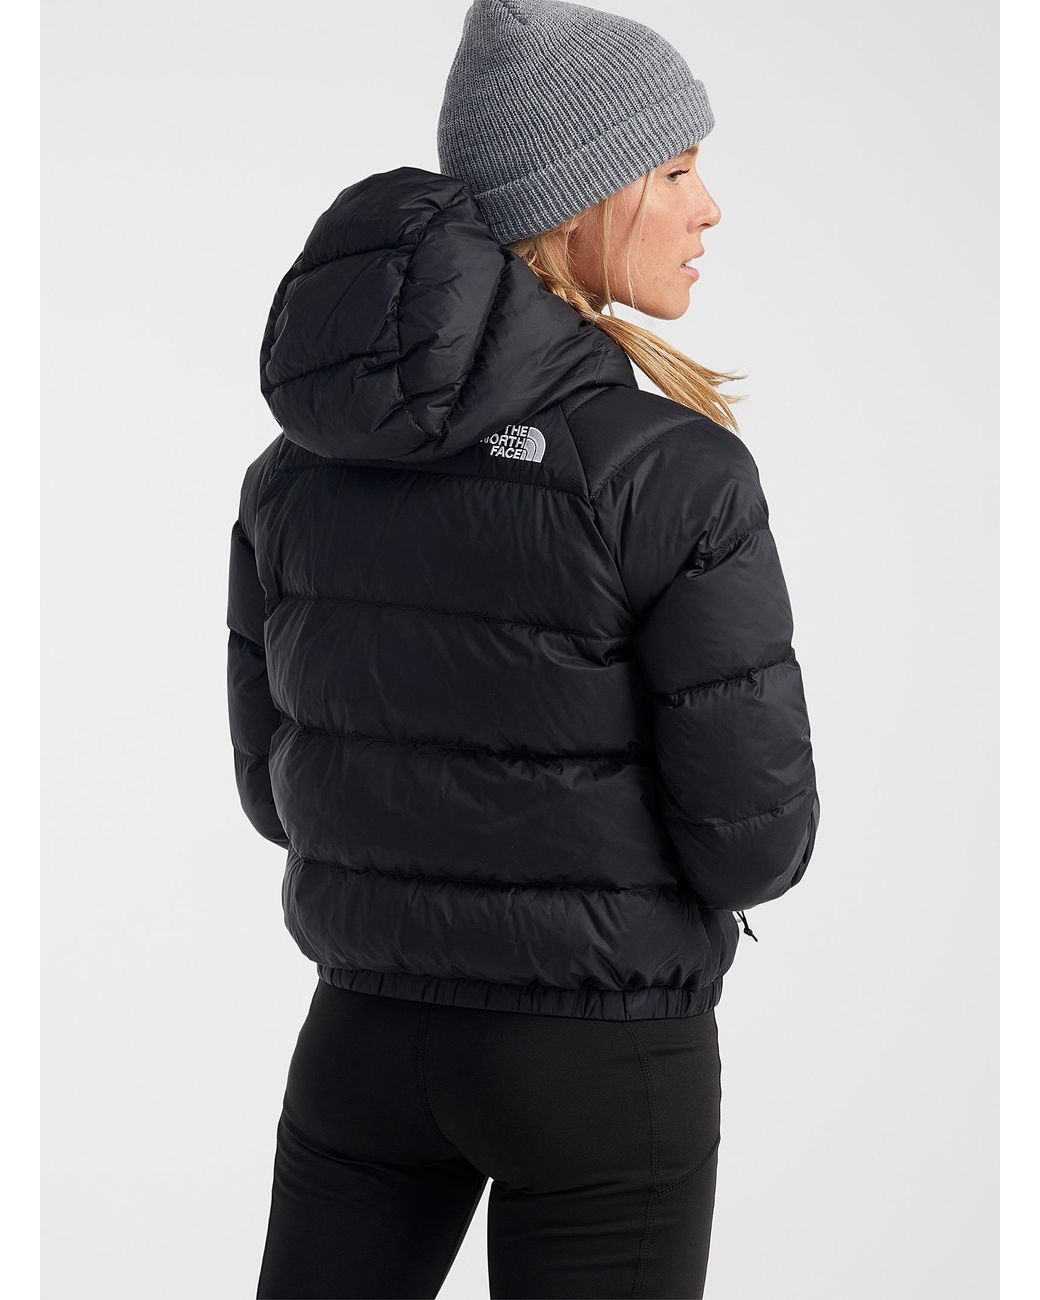 The North Face Hydrenalite Cropped Hooded Puffer Jacket in Black | Lyst